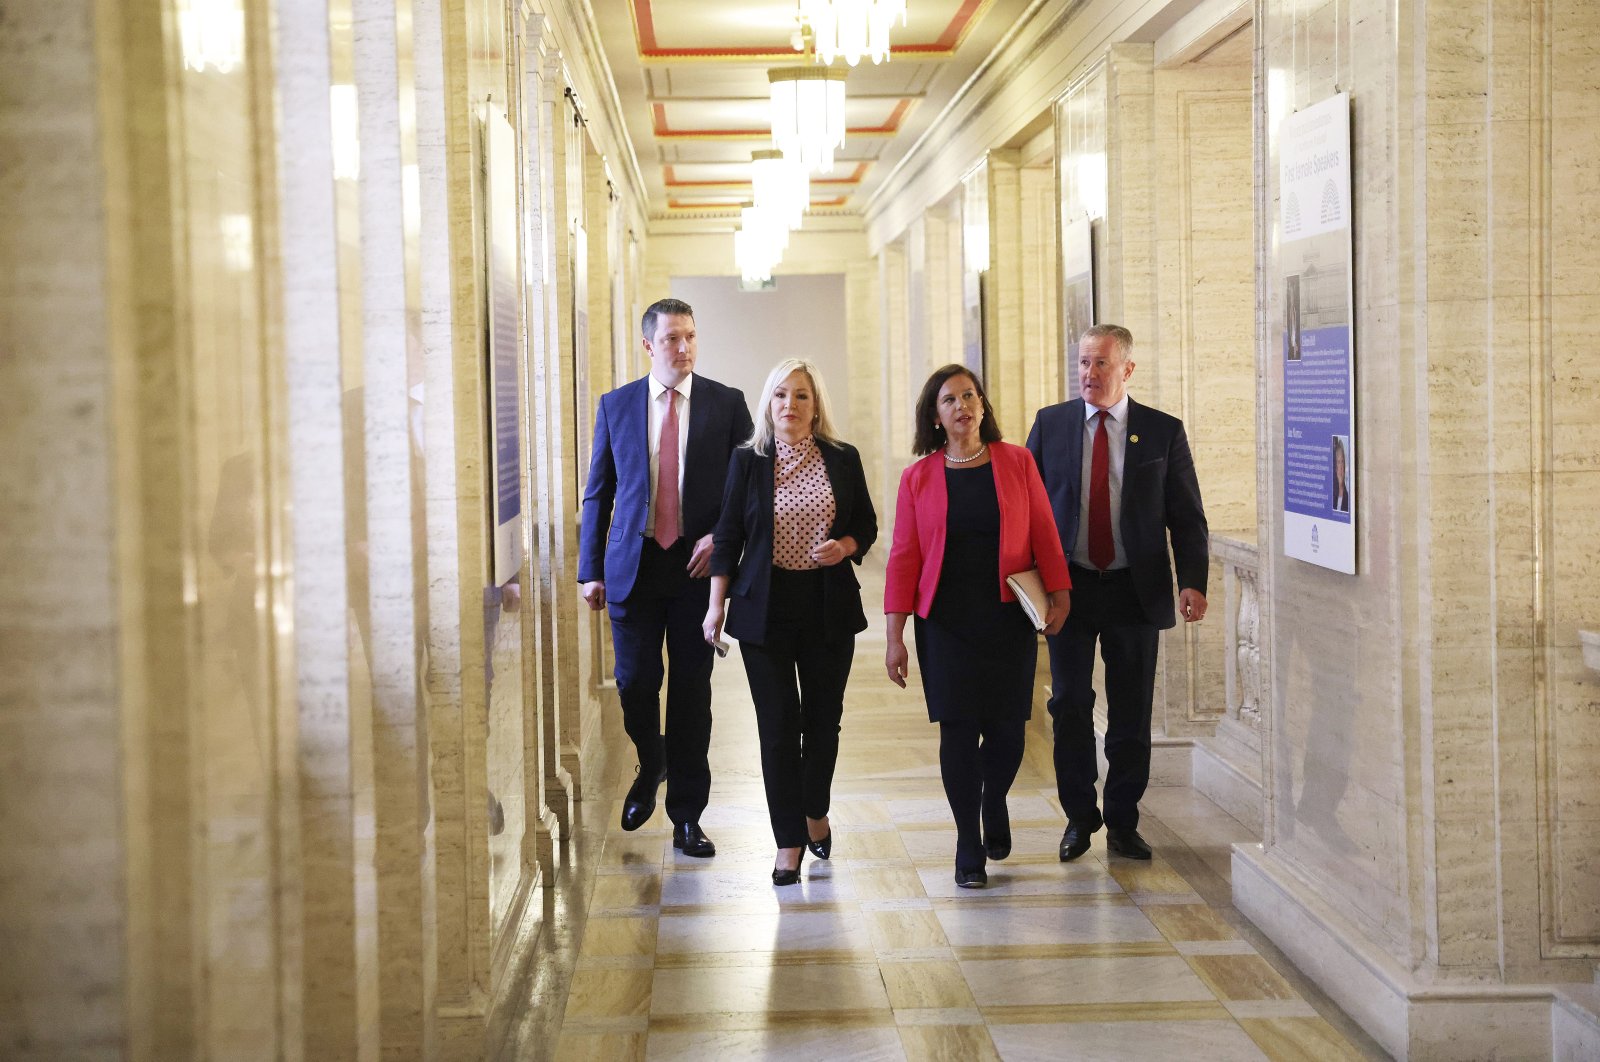 From left, Sinn Fein&#039;s Pat Finucane, Michelle O&#039;Neil, party leader Mary Lou McDonald and Conor Murphy walk through the corridors of Parliament, Belfast, Northern Ireland, May 9, 2022. (AP Photo)